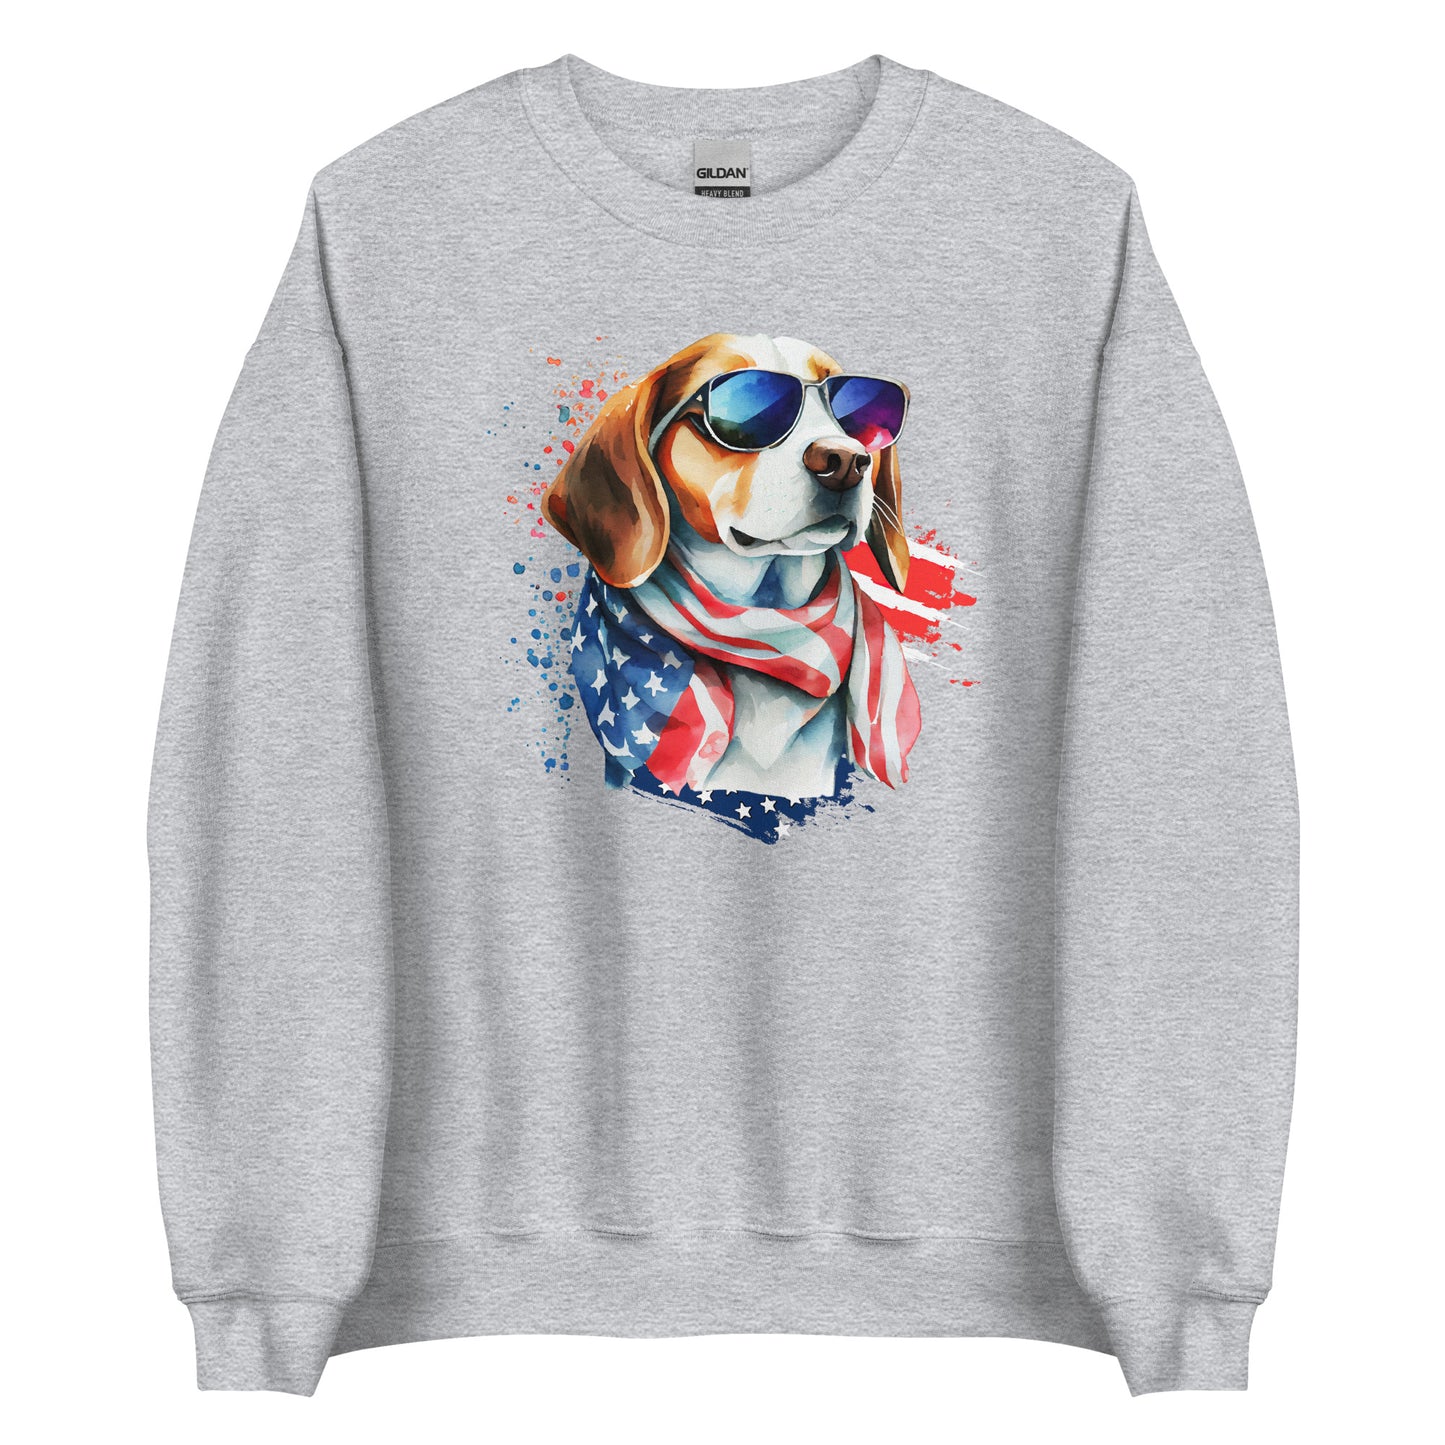 Grey Colored Patriot Sweatshirt Printed With Patriotic Dog And USA Colors